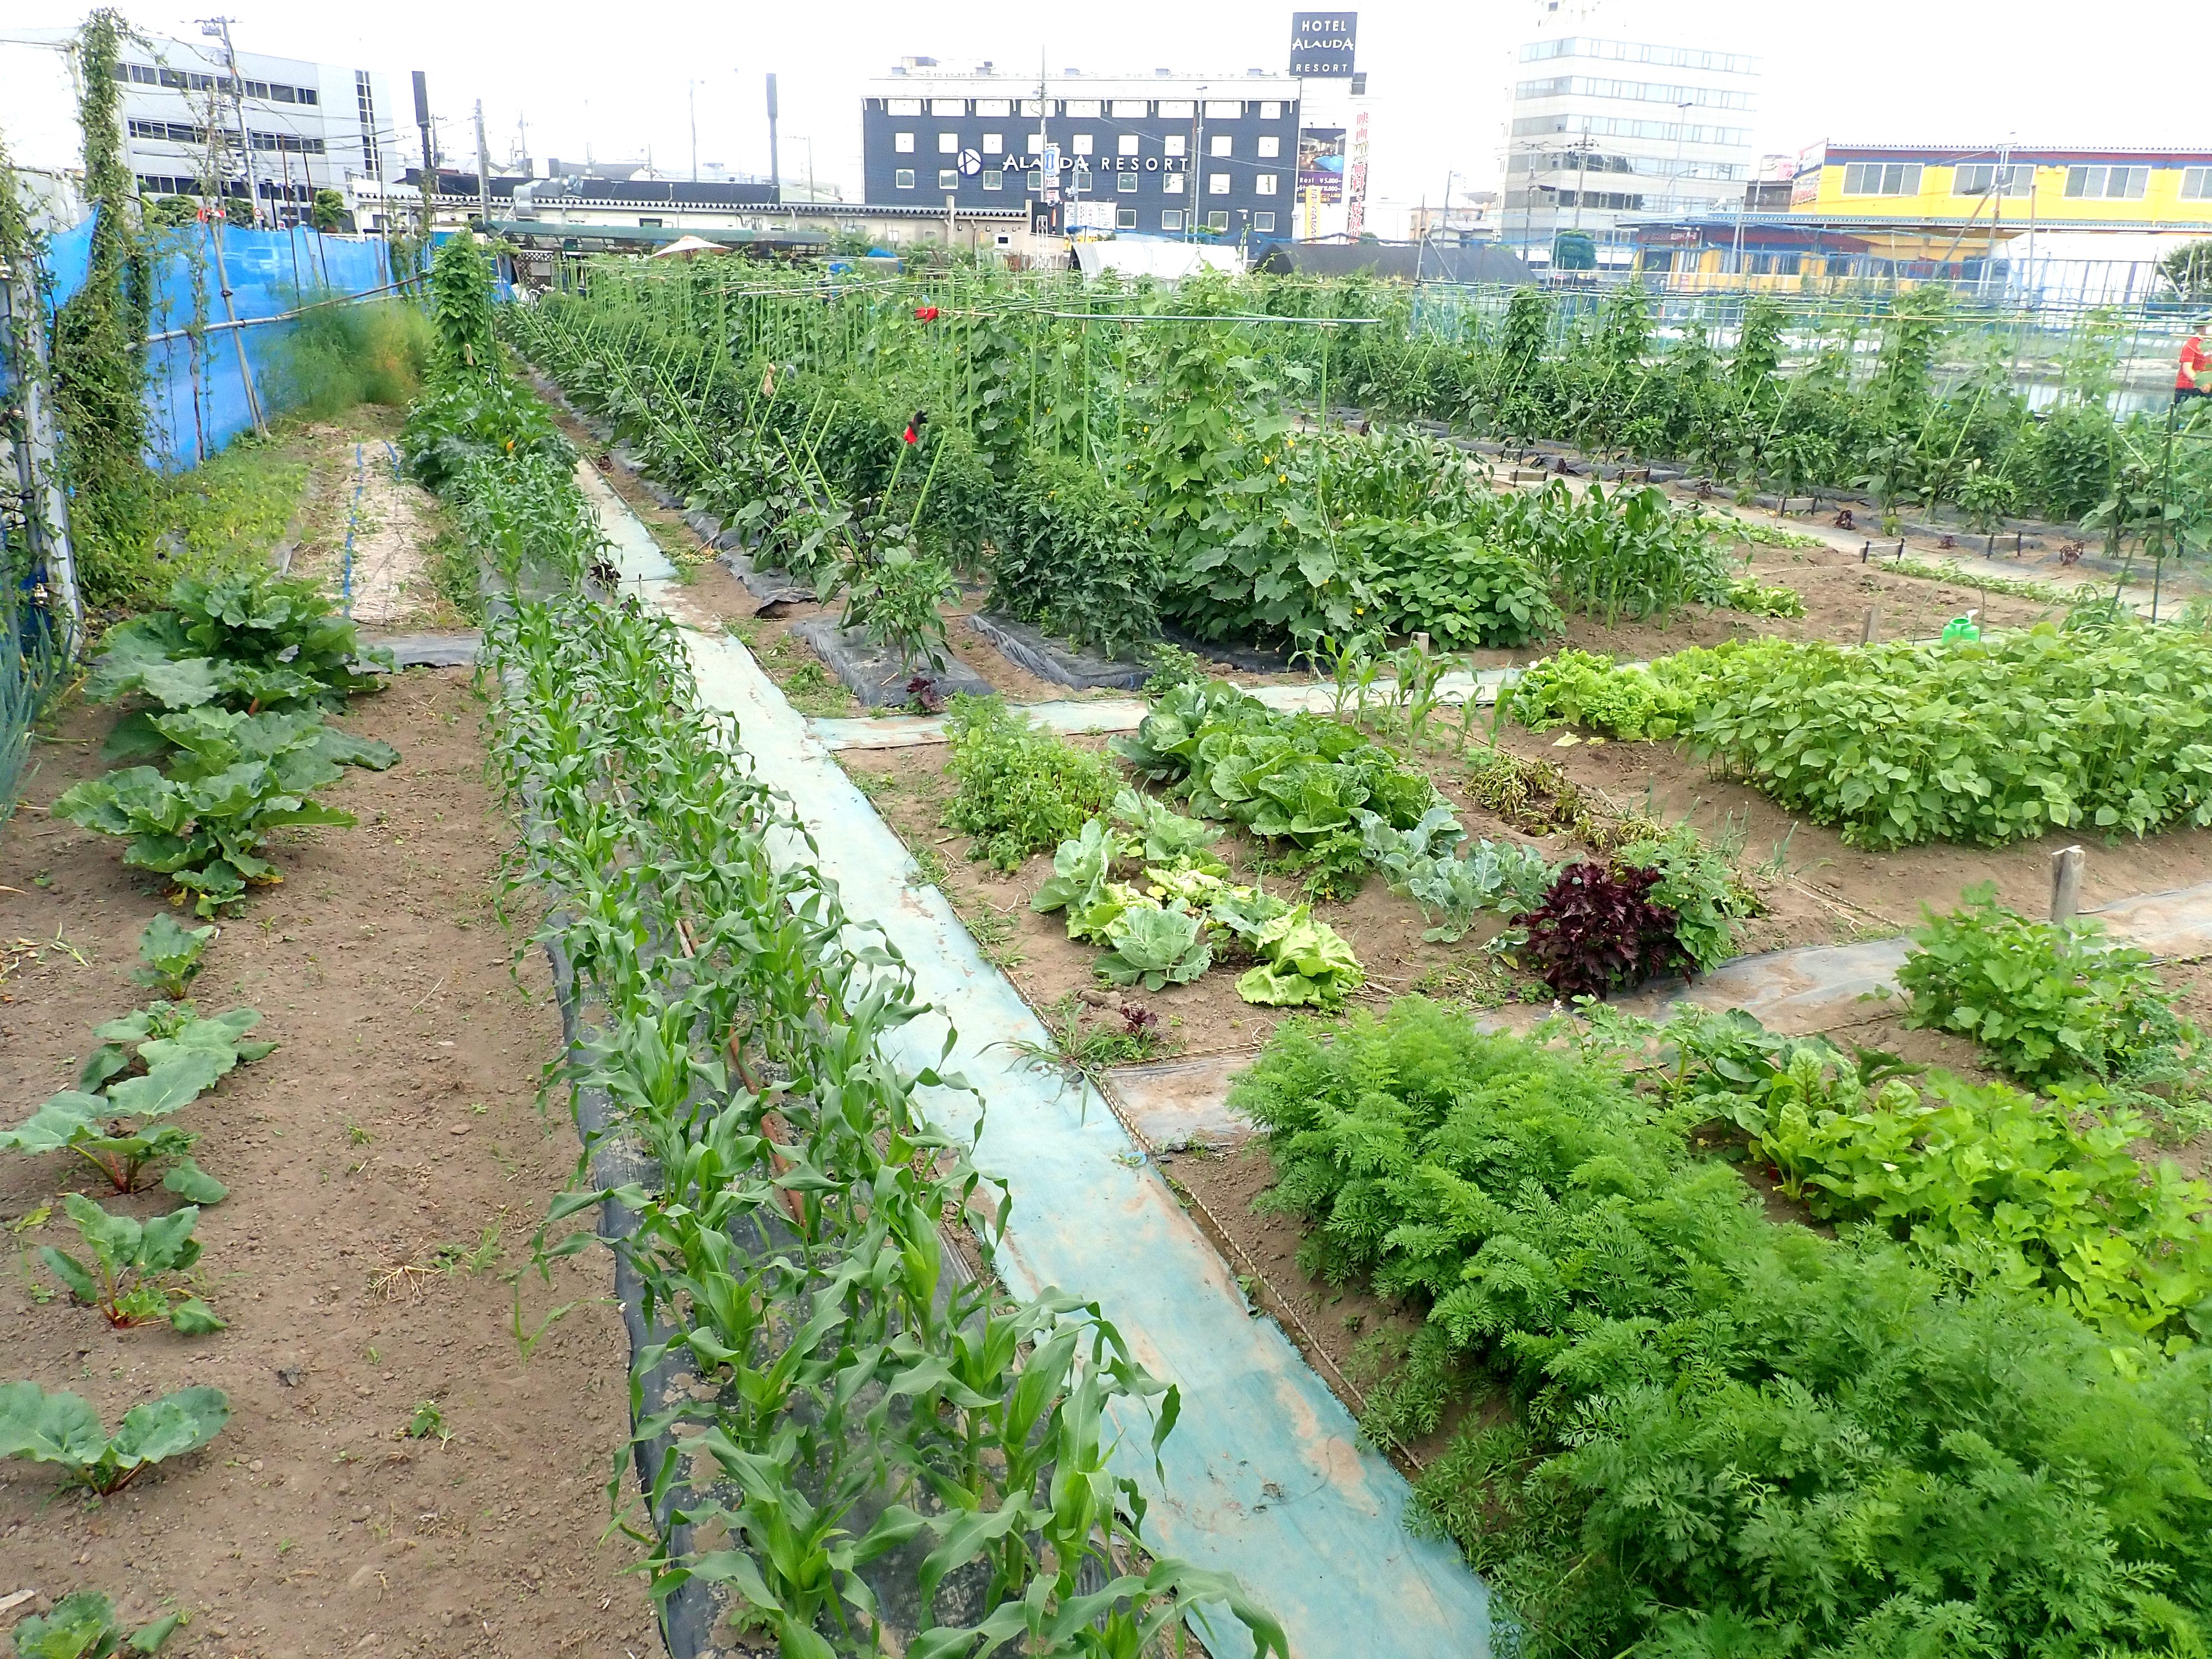 Here’s How To Join A Community Garden In Tokyo